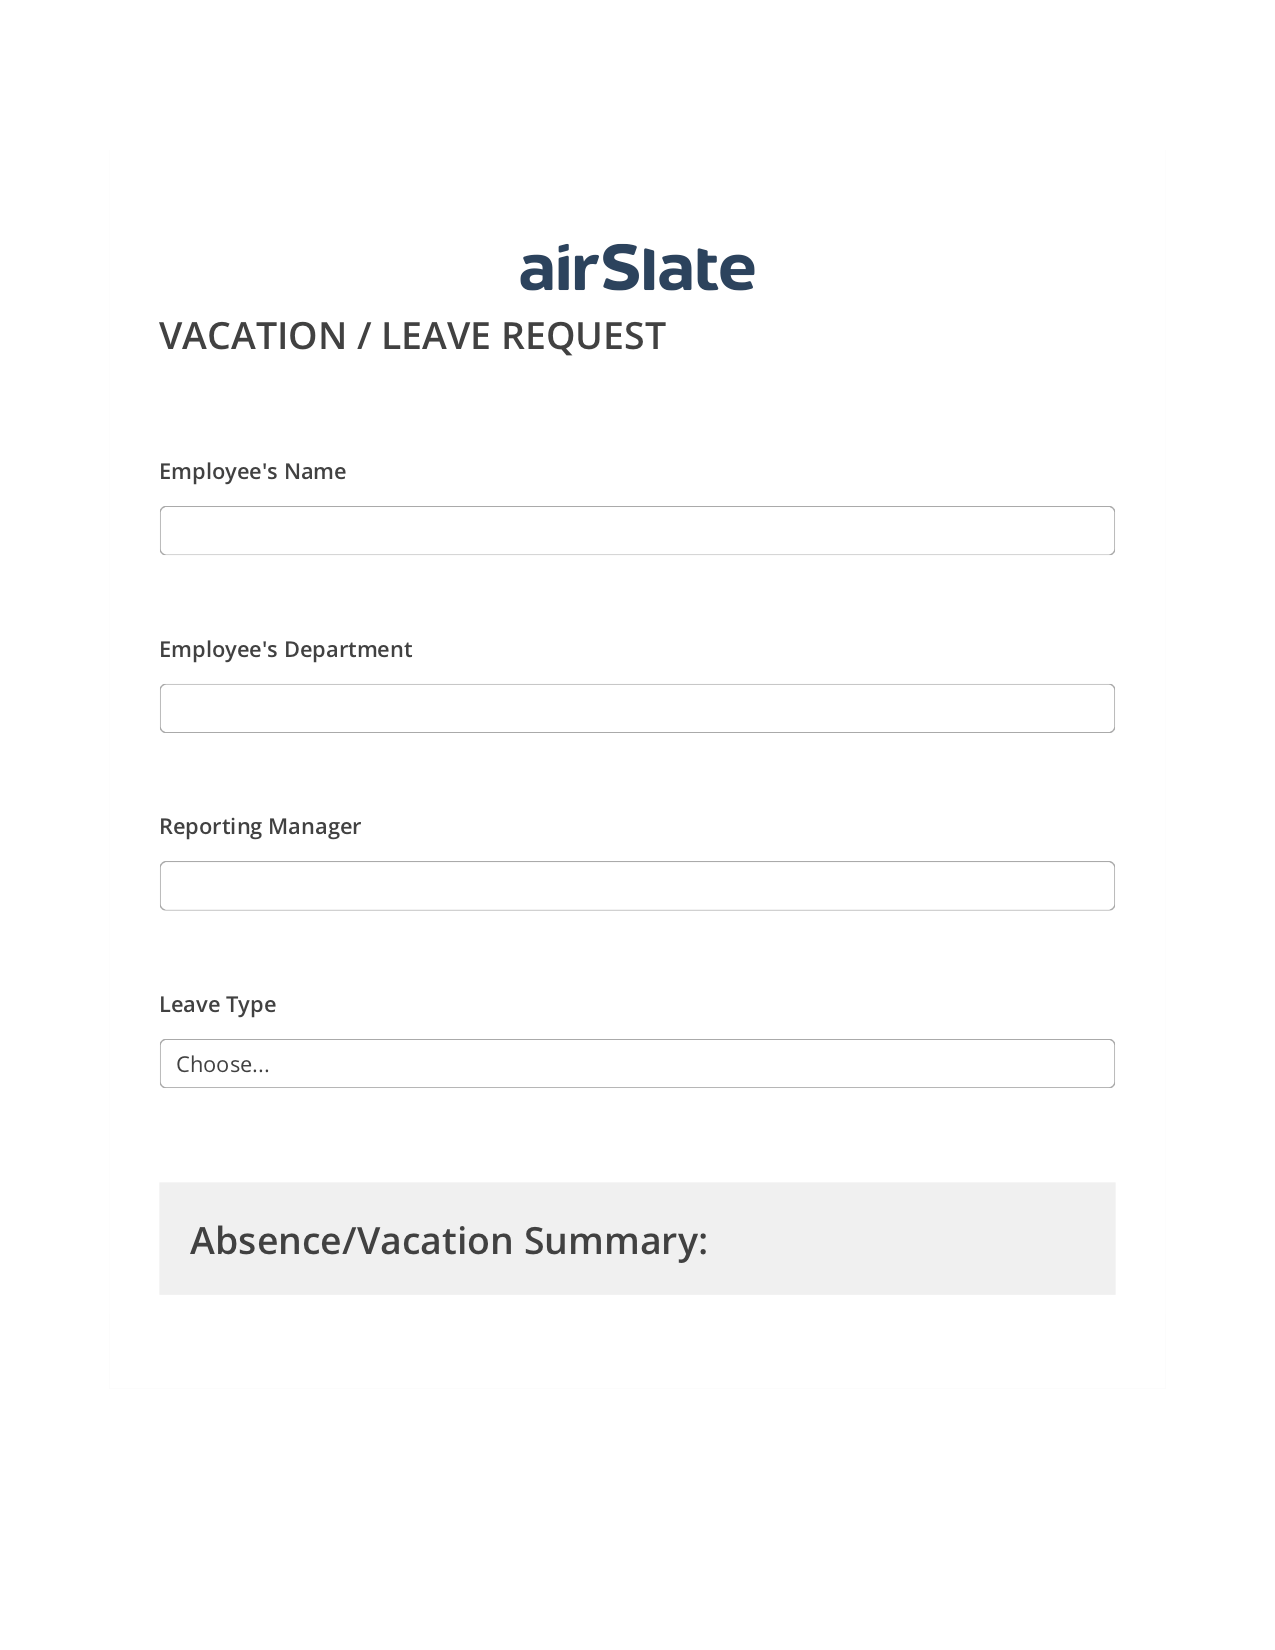 Vacation/Leave Request Workflow Pre-fill Dropdowns from Excel Bot, Remove Tags From Slate Bot, Export to Excel 365 Bot